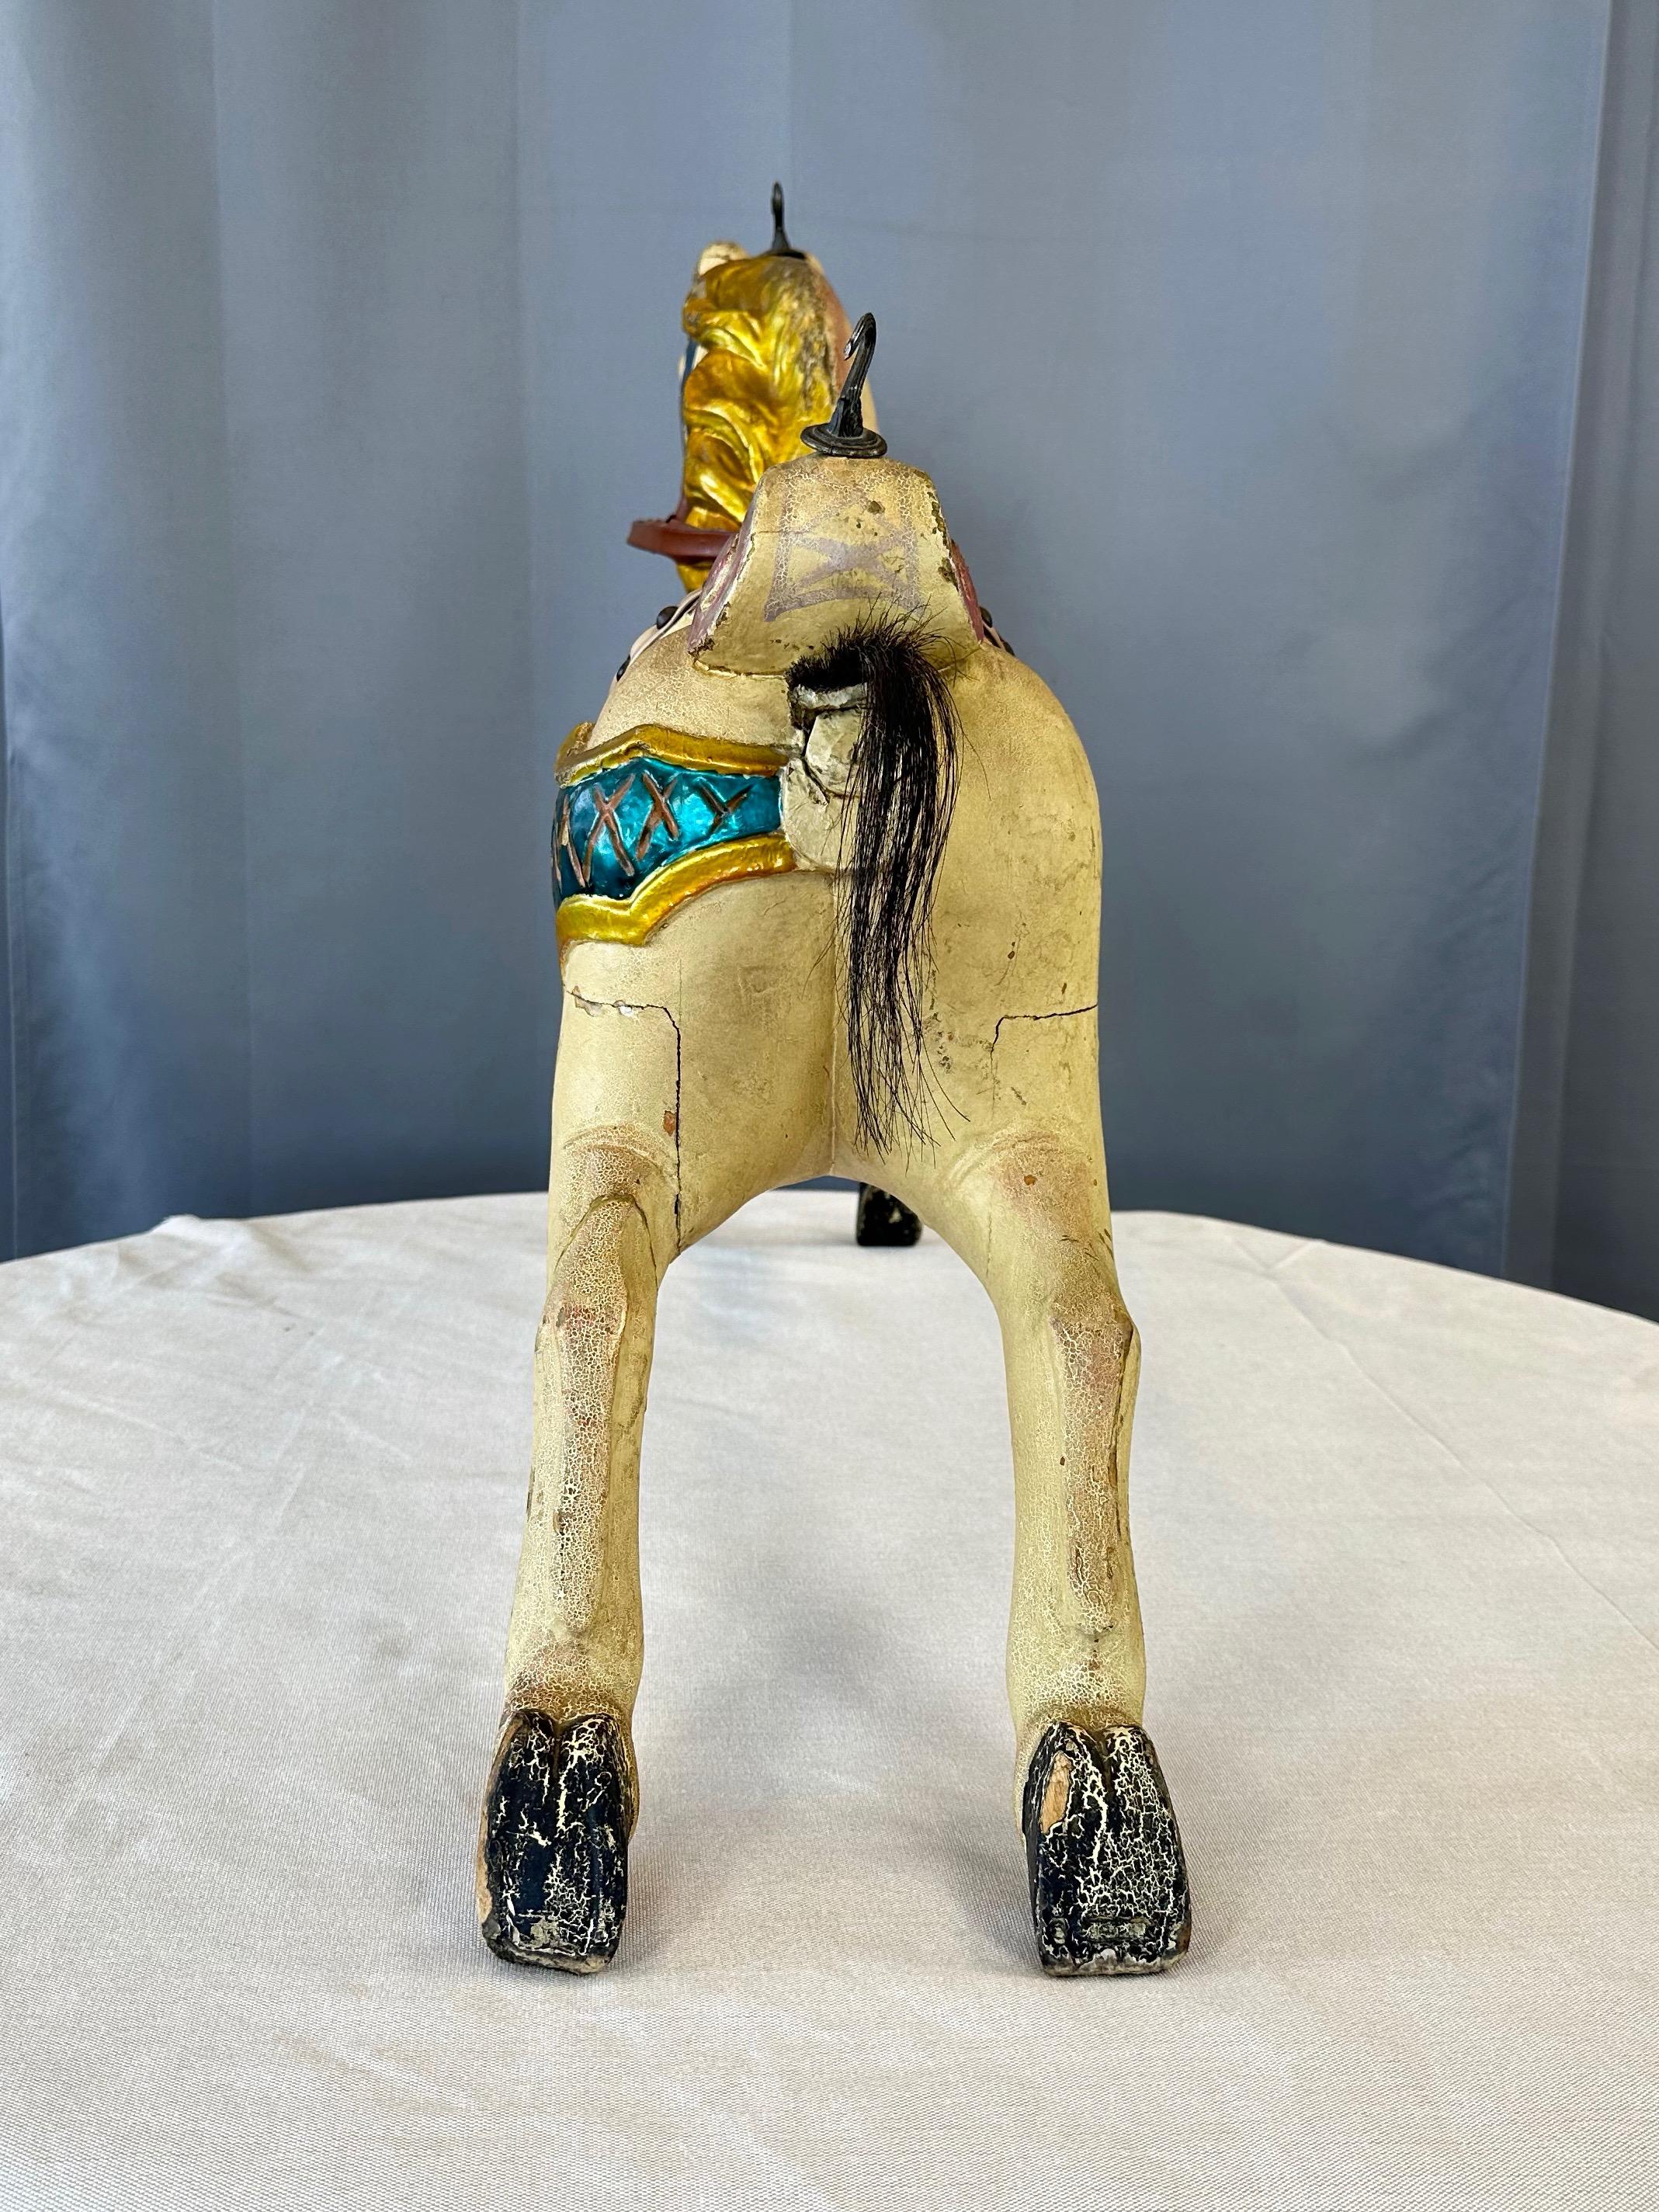 American Child’s Wood Carousel Horse with Polychrome, Mohair, and Horse Hair, c. 1920 For Sale